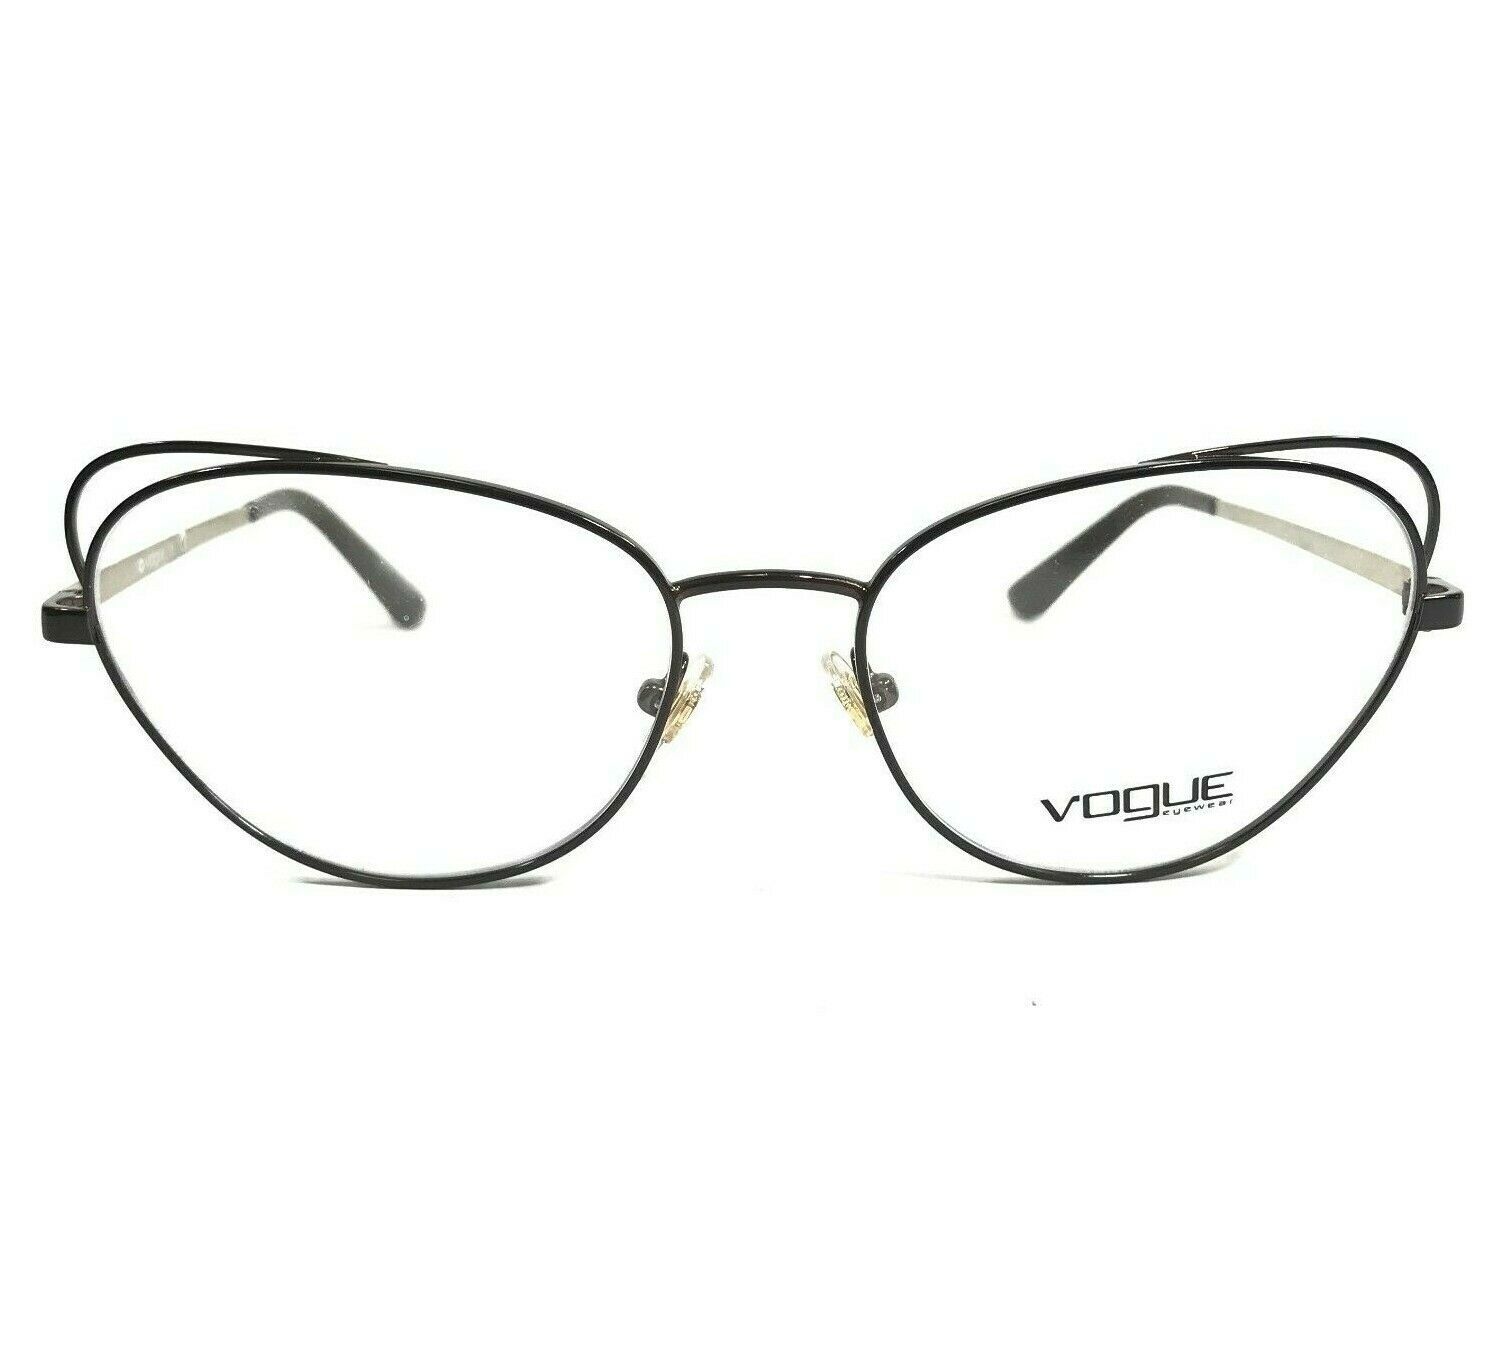 Primary image for Vogue Eyeglasses Frames VO4056 997 Brown Gold Cat Eye Wire Rim 54-17-135